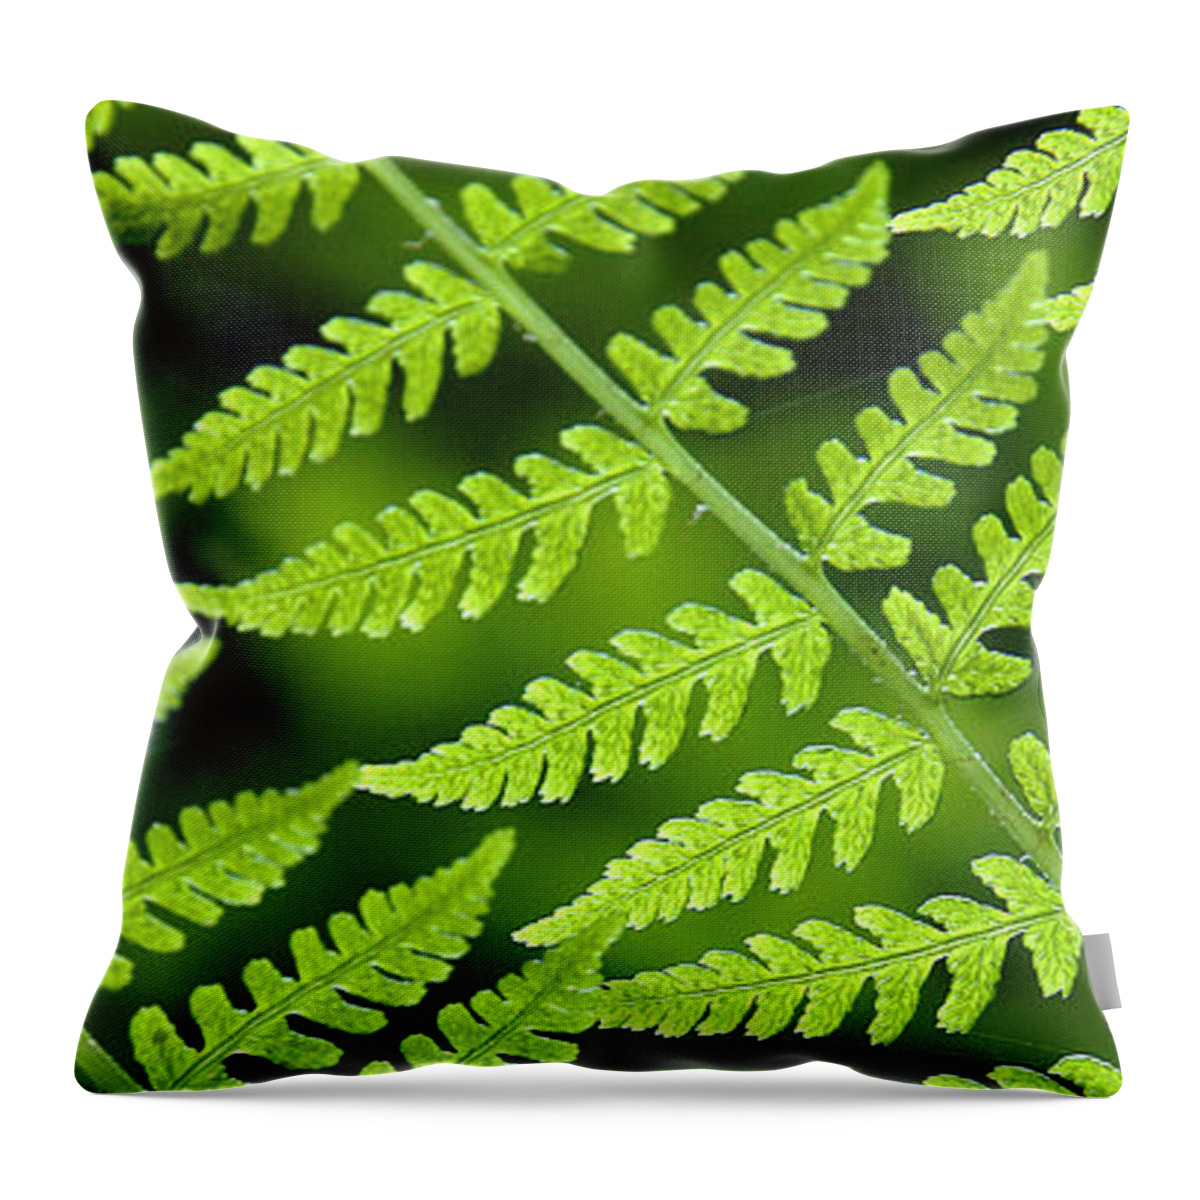 Fern Throw Pillow featuring the photograph Fern Branches by Ted Keller